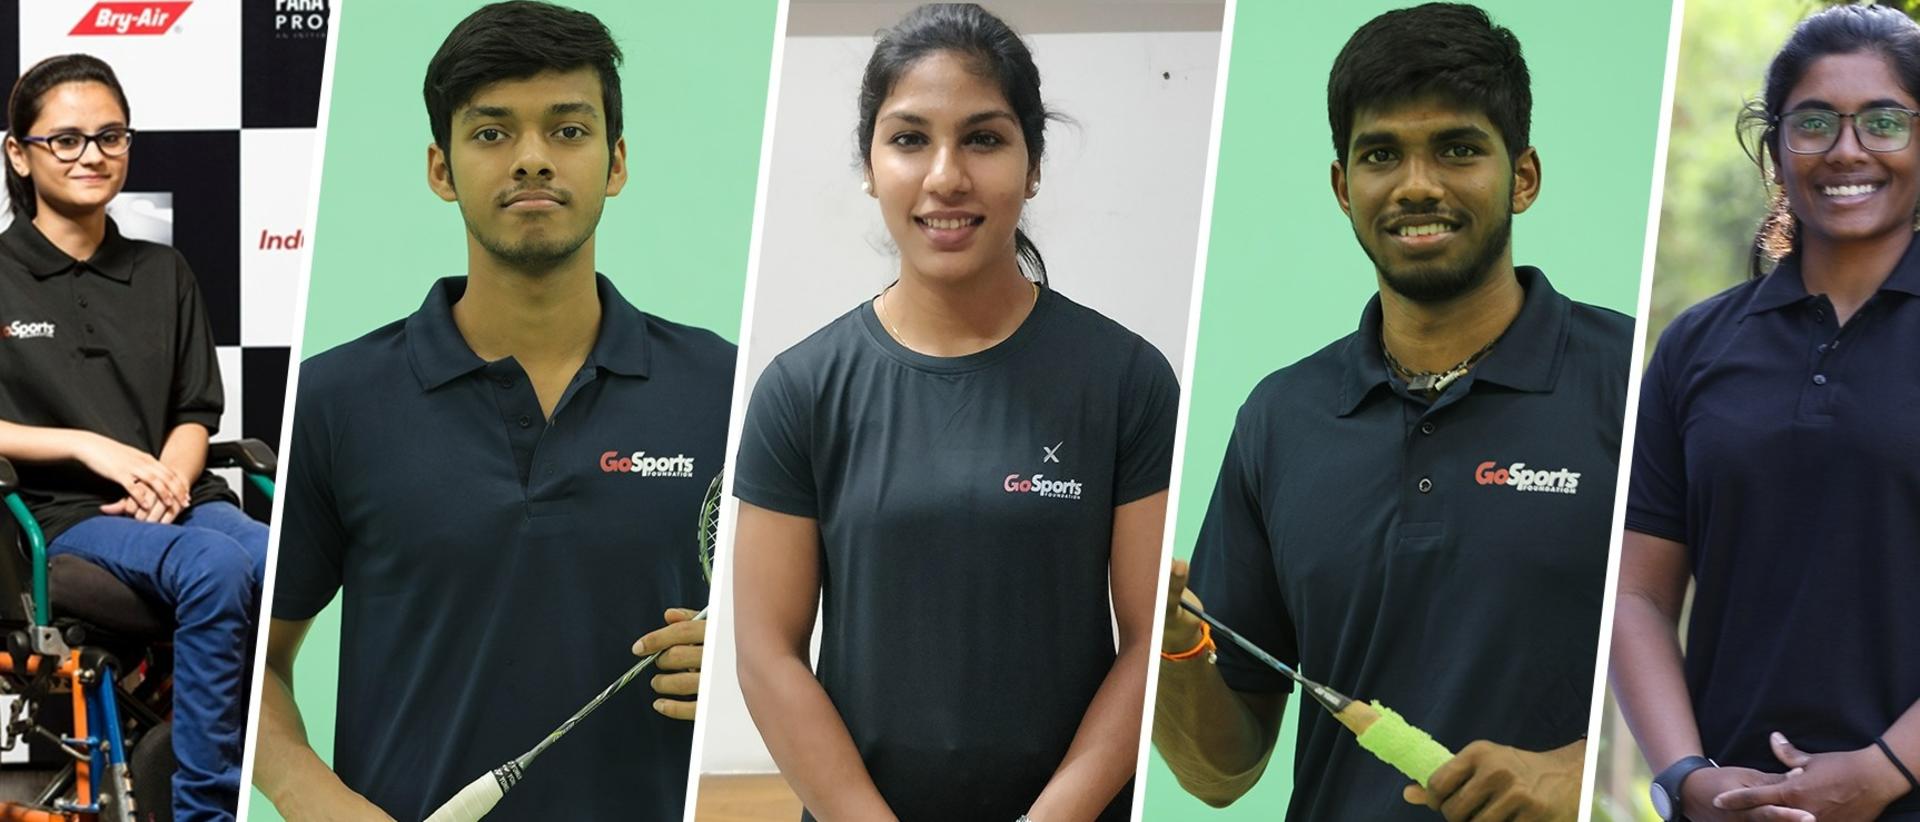 We provide support to India's top and emerging athletes through our programmes